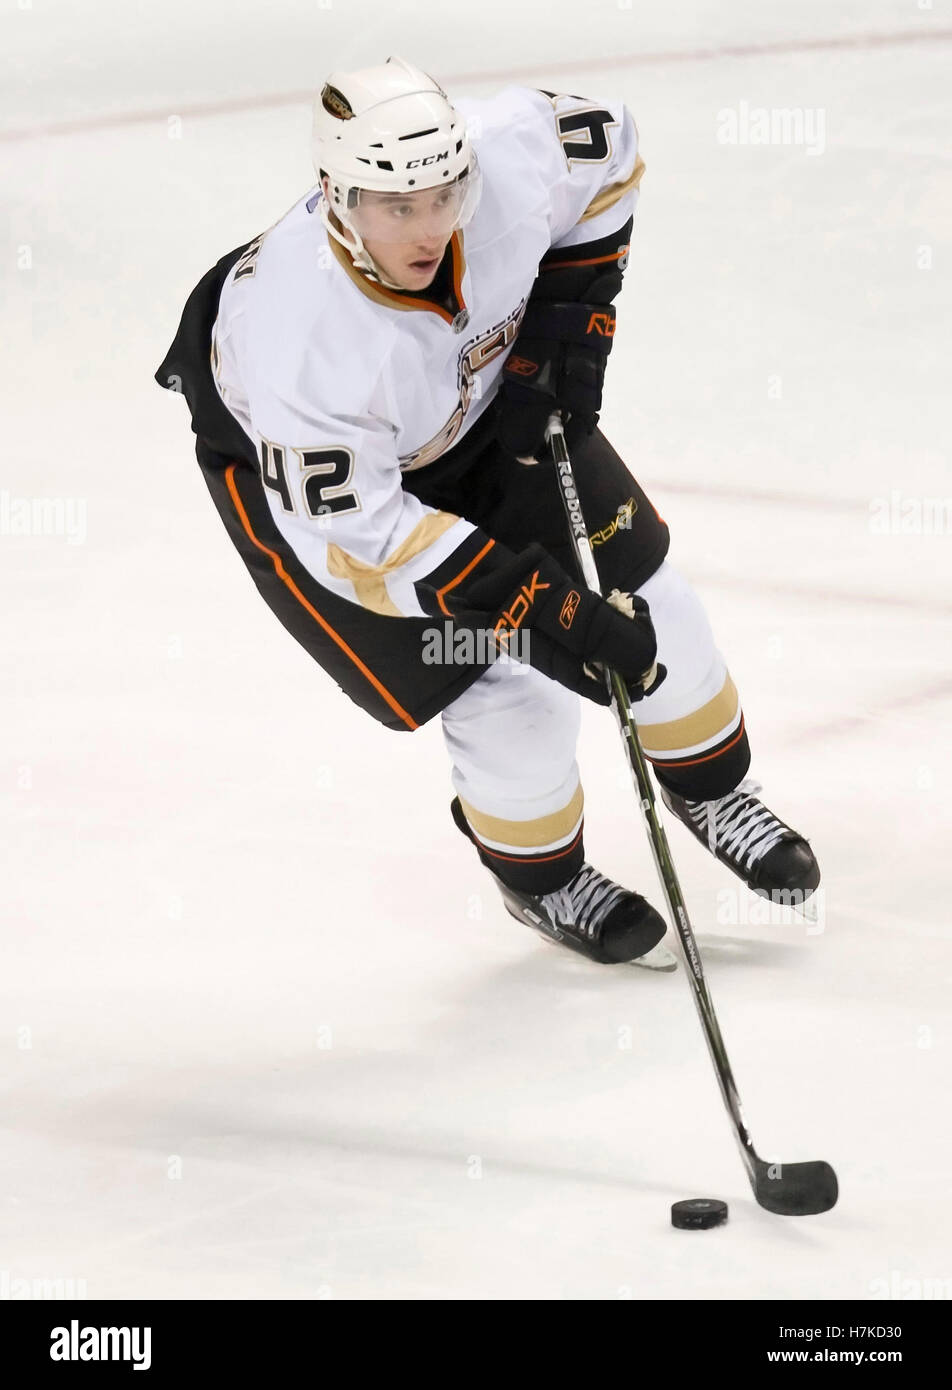 January 21, 2010; San Jose, CA, USA; Anaheim Ducks right wing Dan Sexton (42) during the second period against the San Jose Sharks at HP Pavilion.  San Jose defeated Anaheim 3-1. Stock Photo